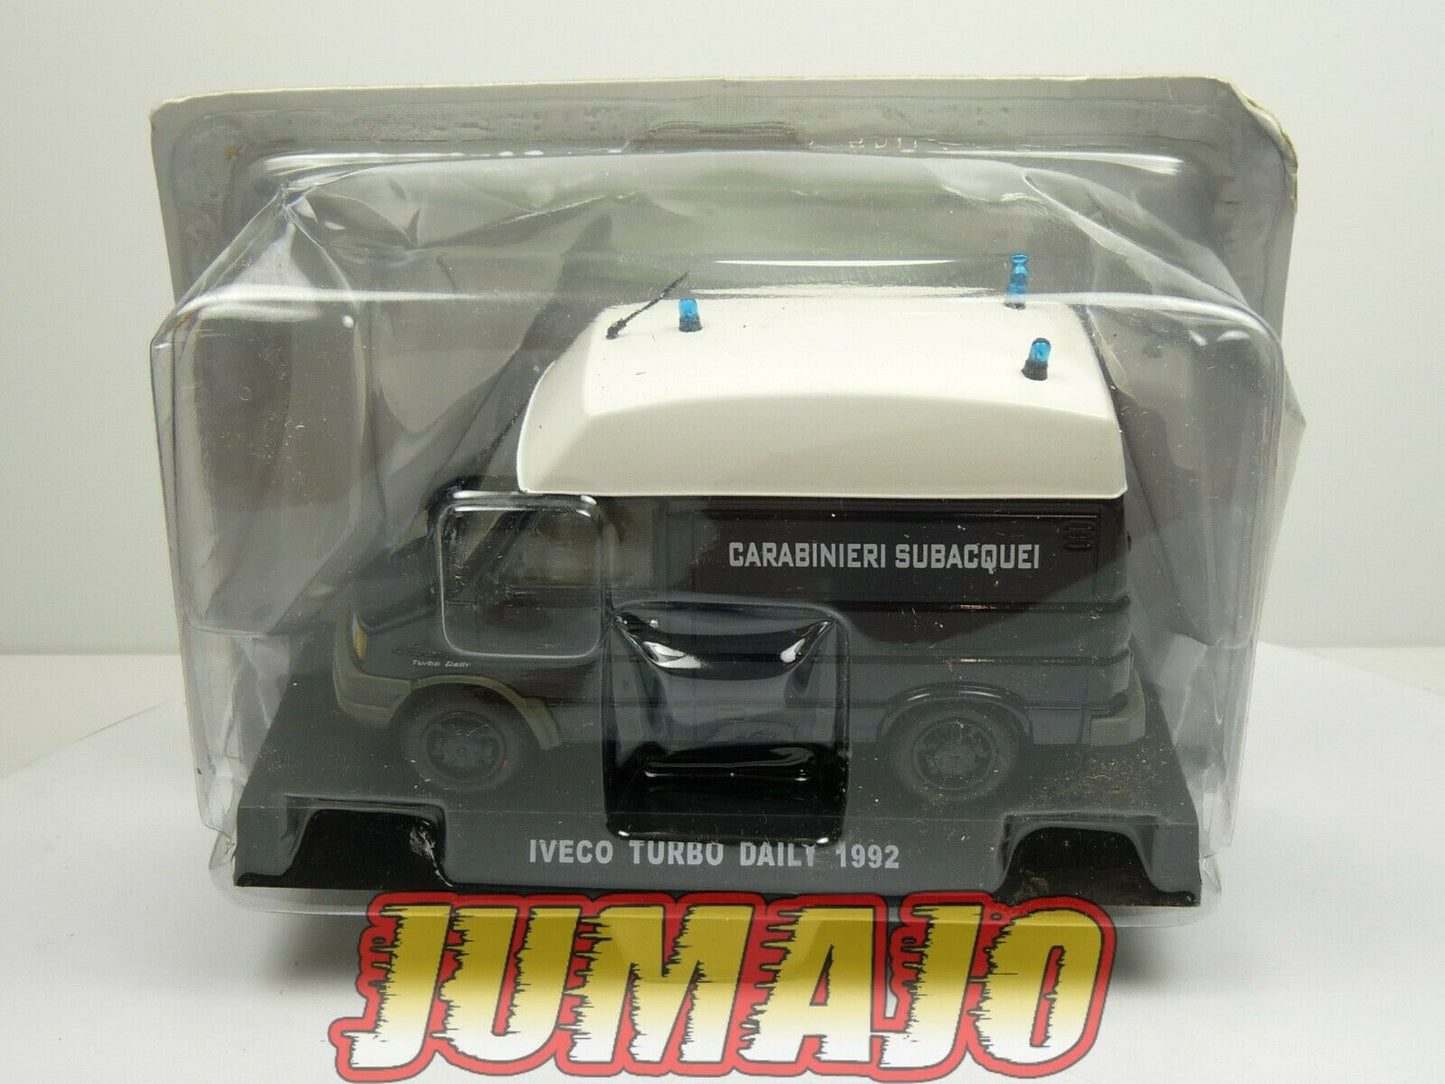 CR32 voiture POLICE 1/43 CARABINIERI : IVECO Turbo Daily 1992